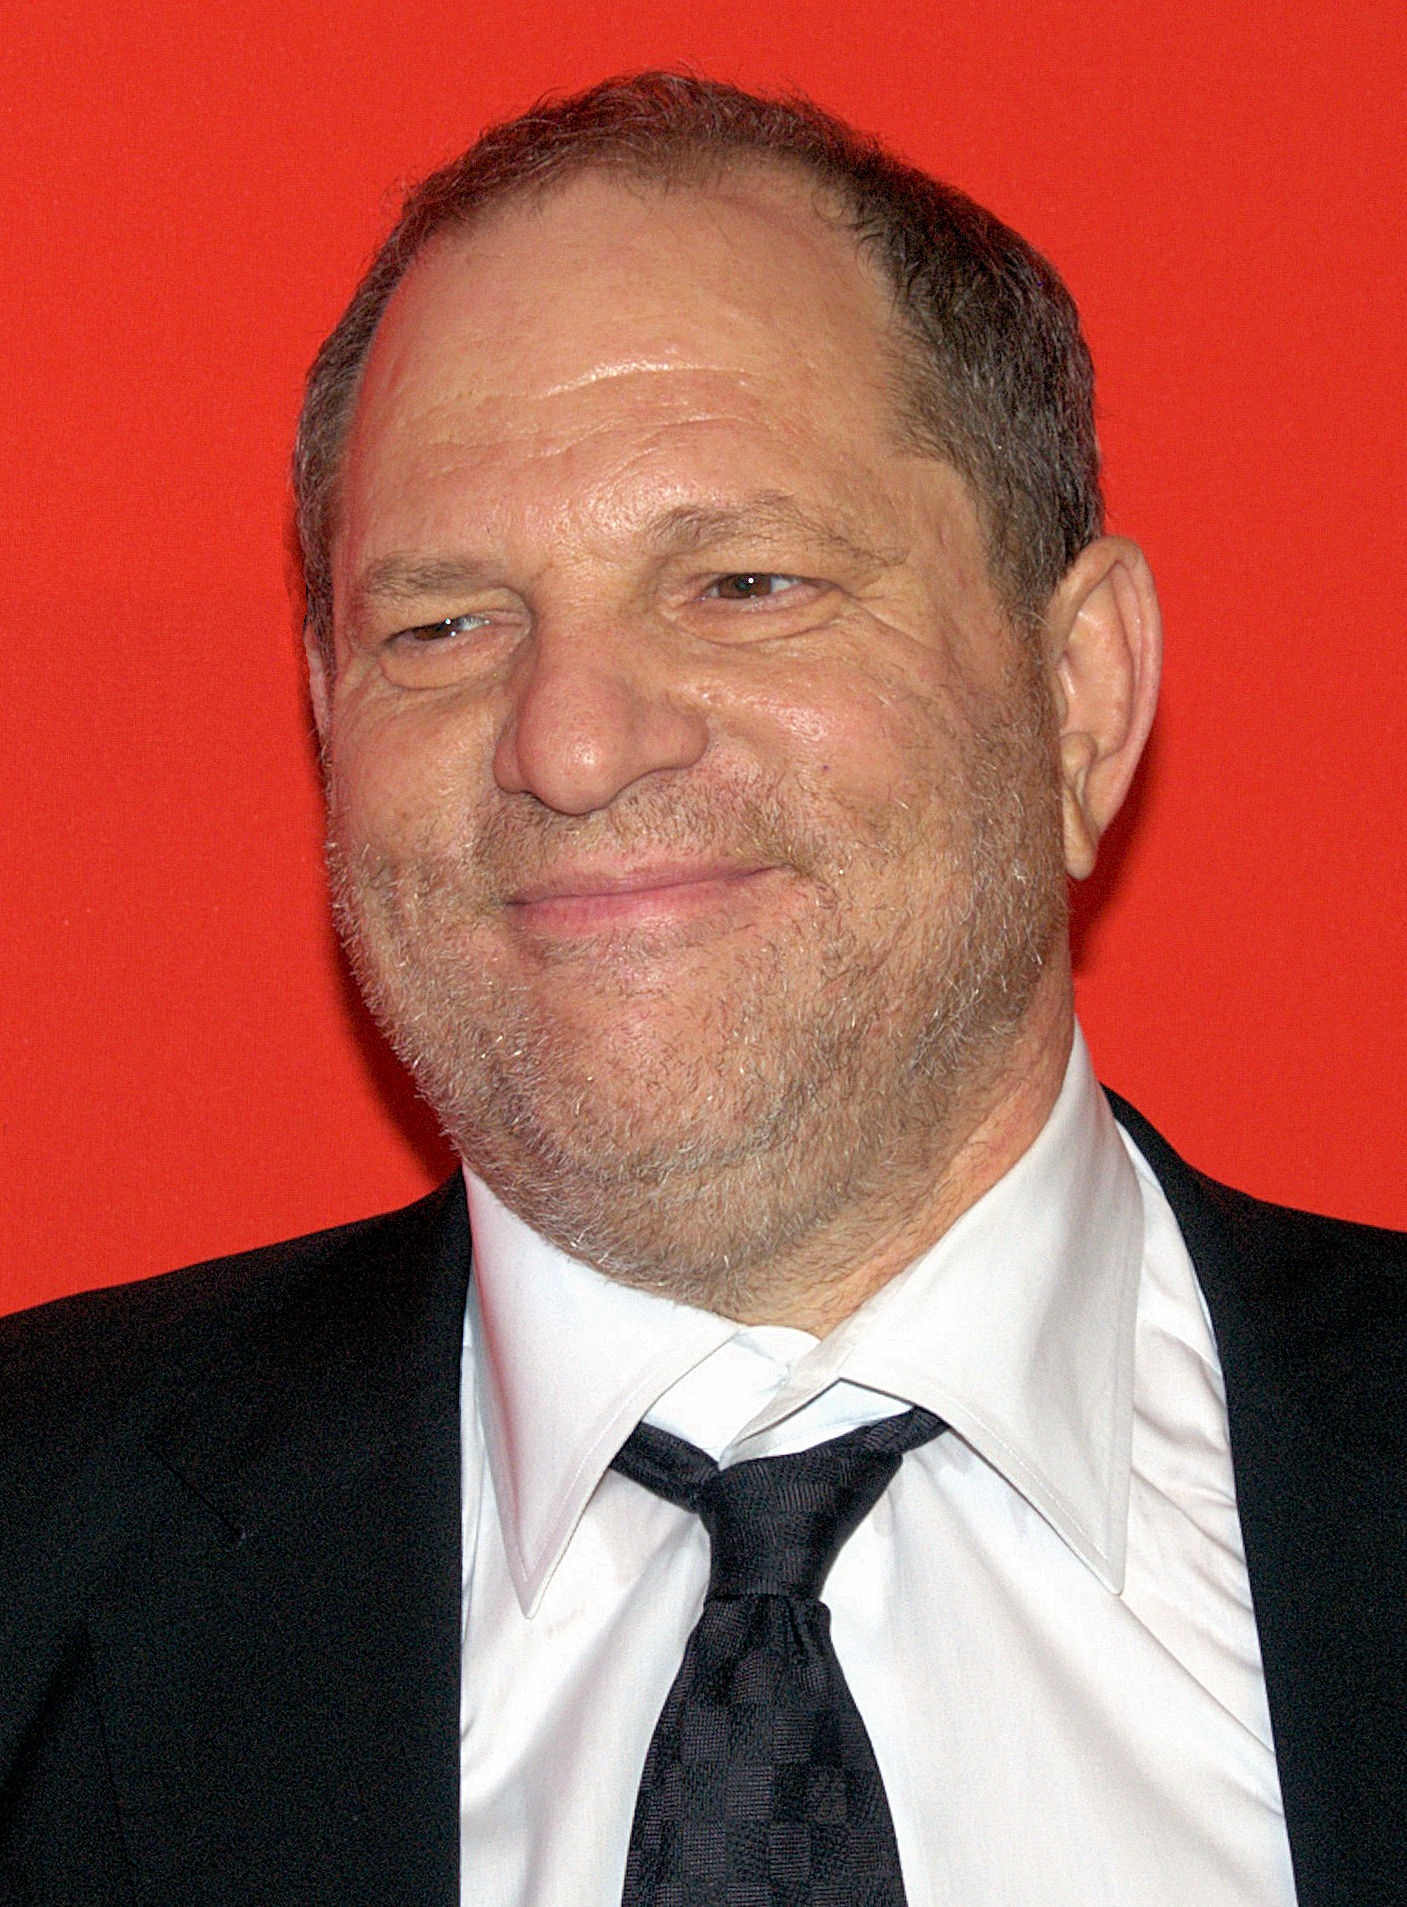 Harvey Weinstein. Bitter Wheat is based on Hollywood mogul's allegations. Image: David Shankbone via Wikipedia Commons